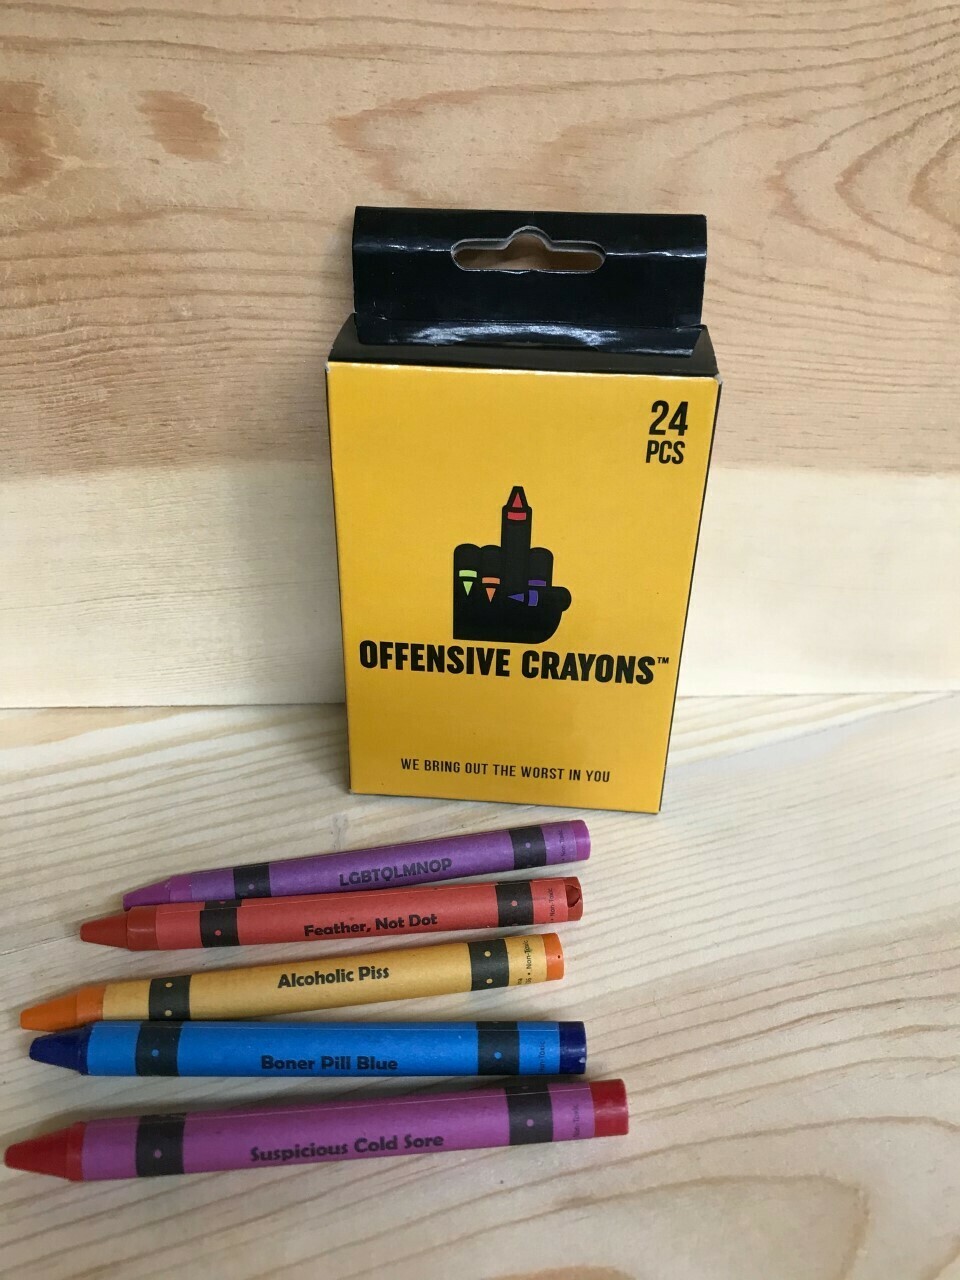 Offensive crayons - OFFENSIVE WE BRING OUT THE WORST IN YOU